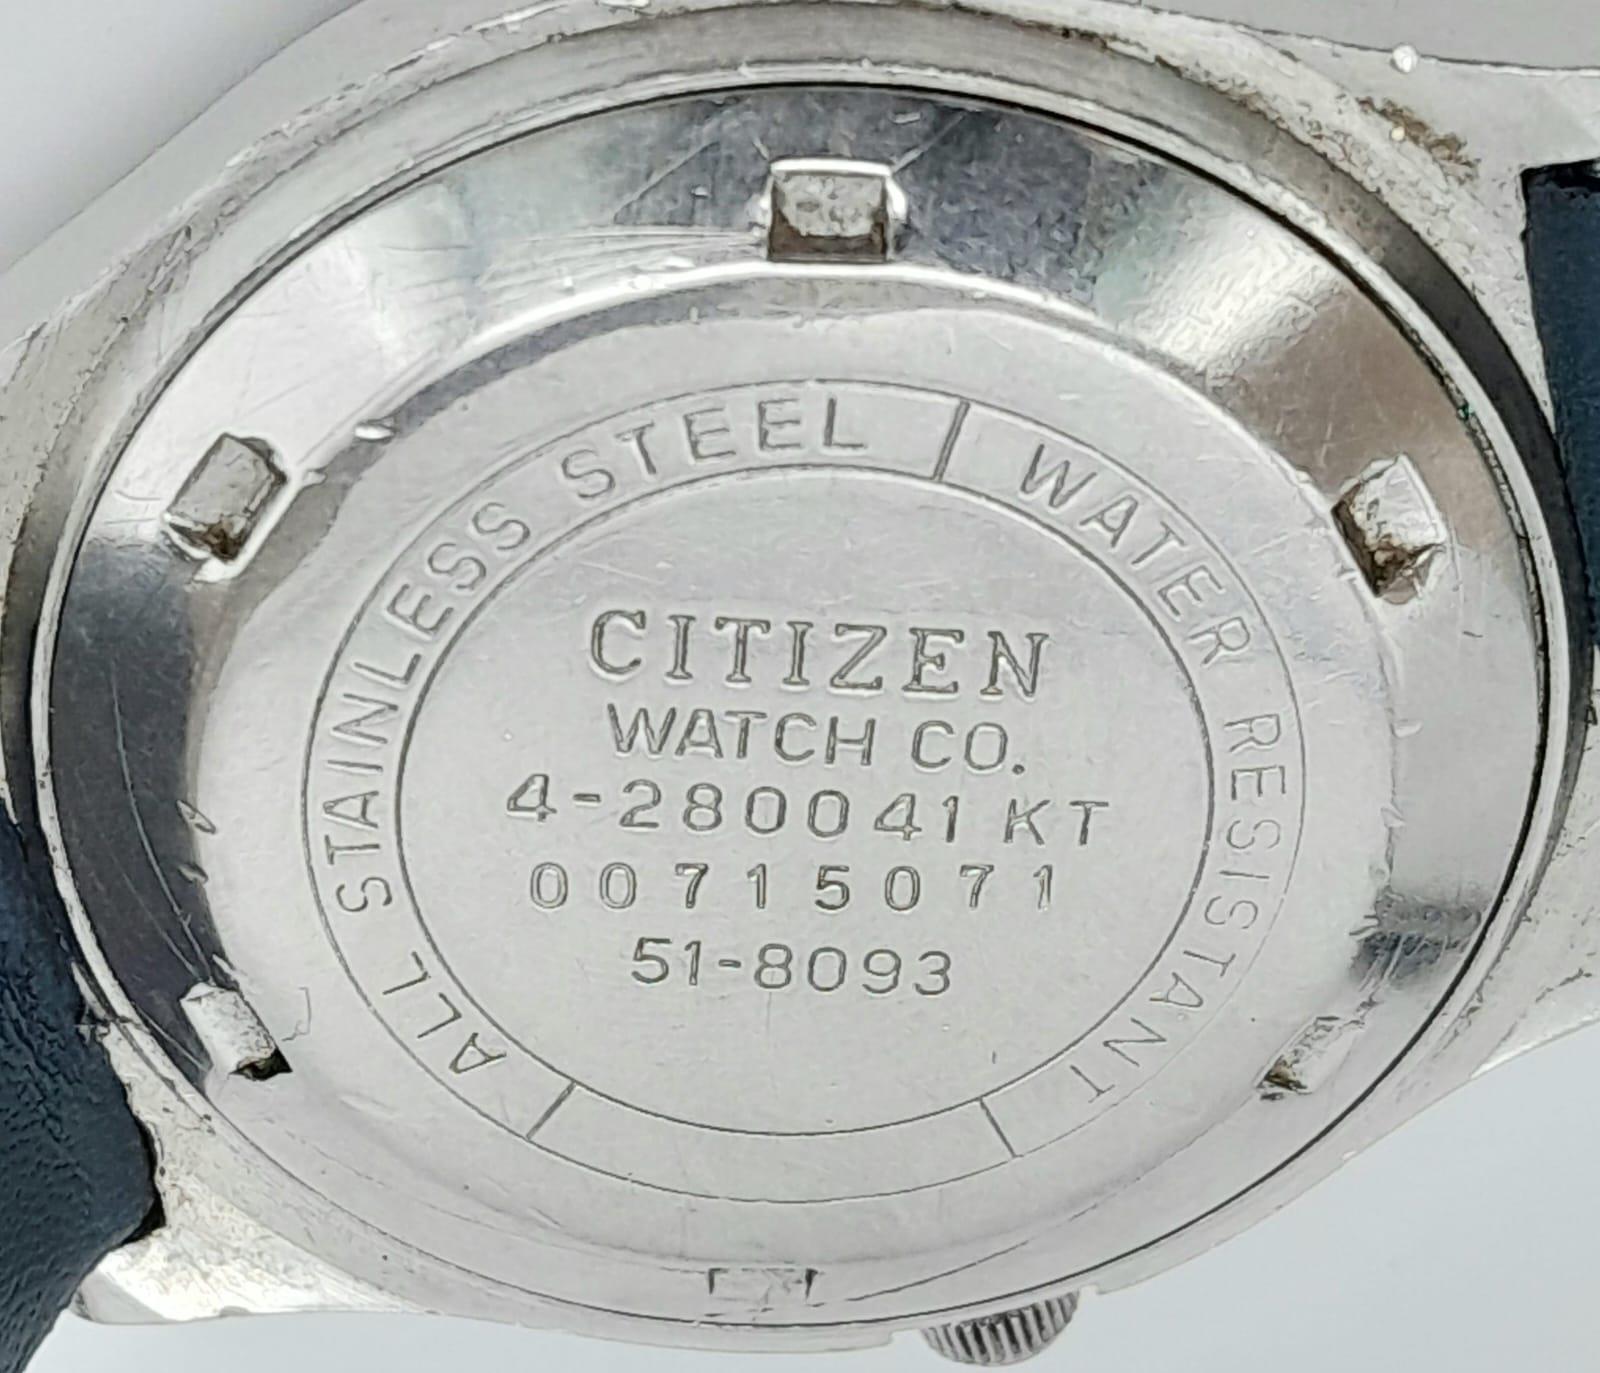 A Vintage Citizen 21 Jewel Automatic Gents Watch. Blue leather strap. Stainless steel case - 36mm. - Image 5 of 6